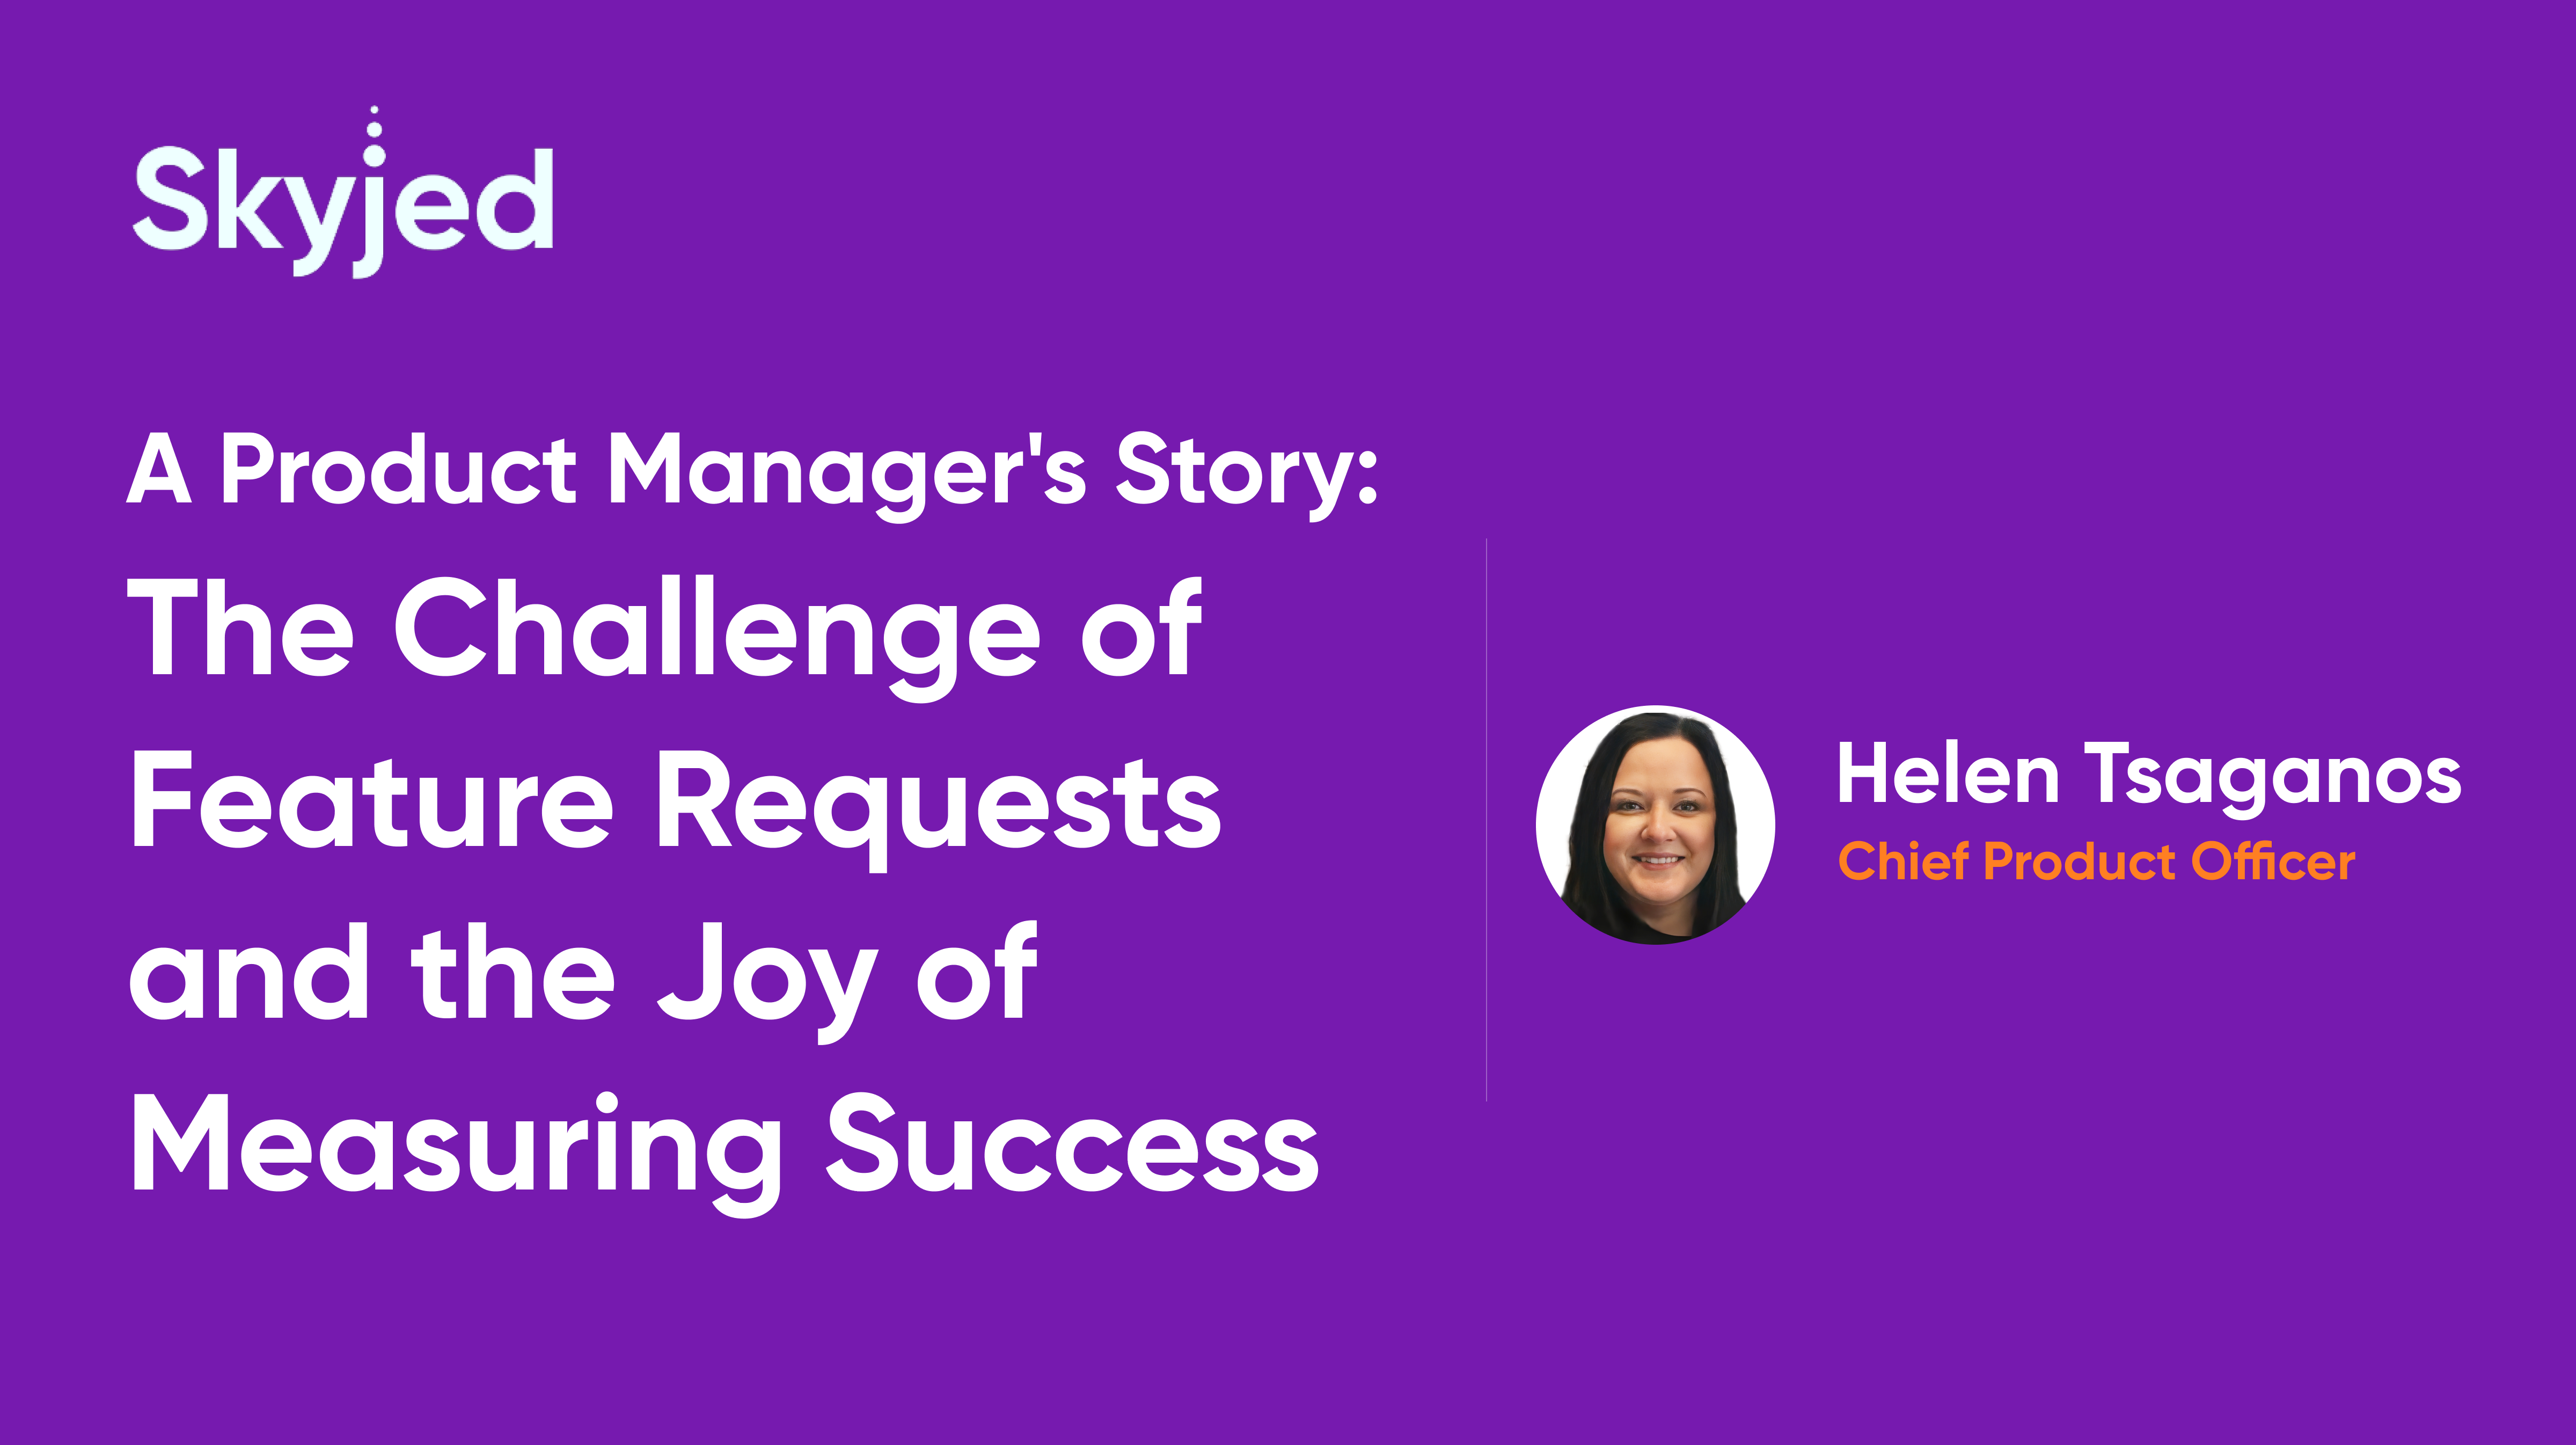 The Challenge of Feature Requests and the Joy of Measuring Success